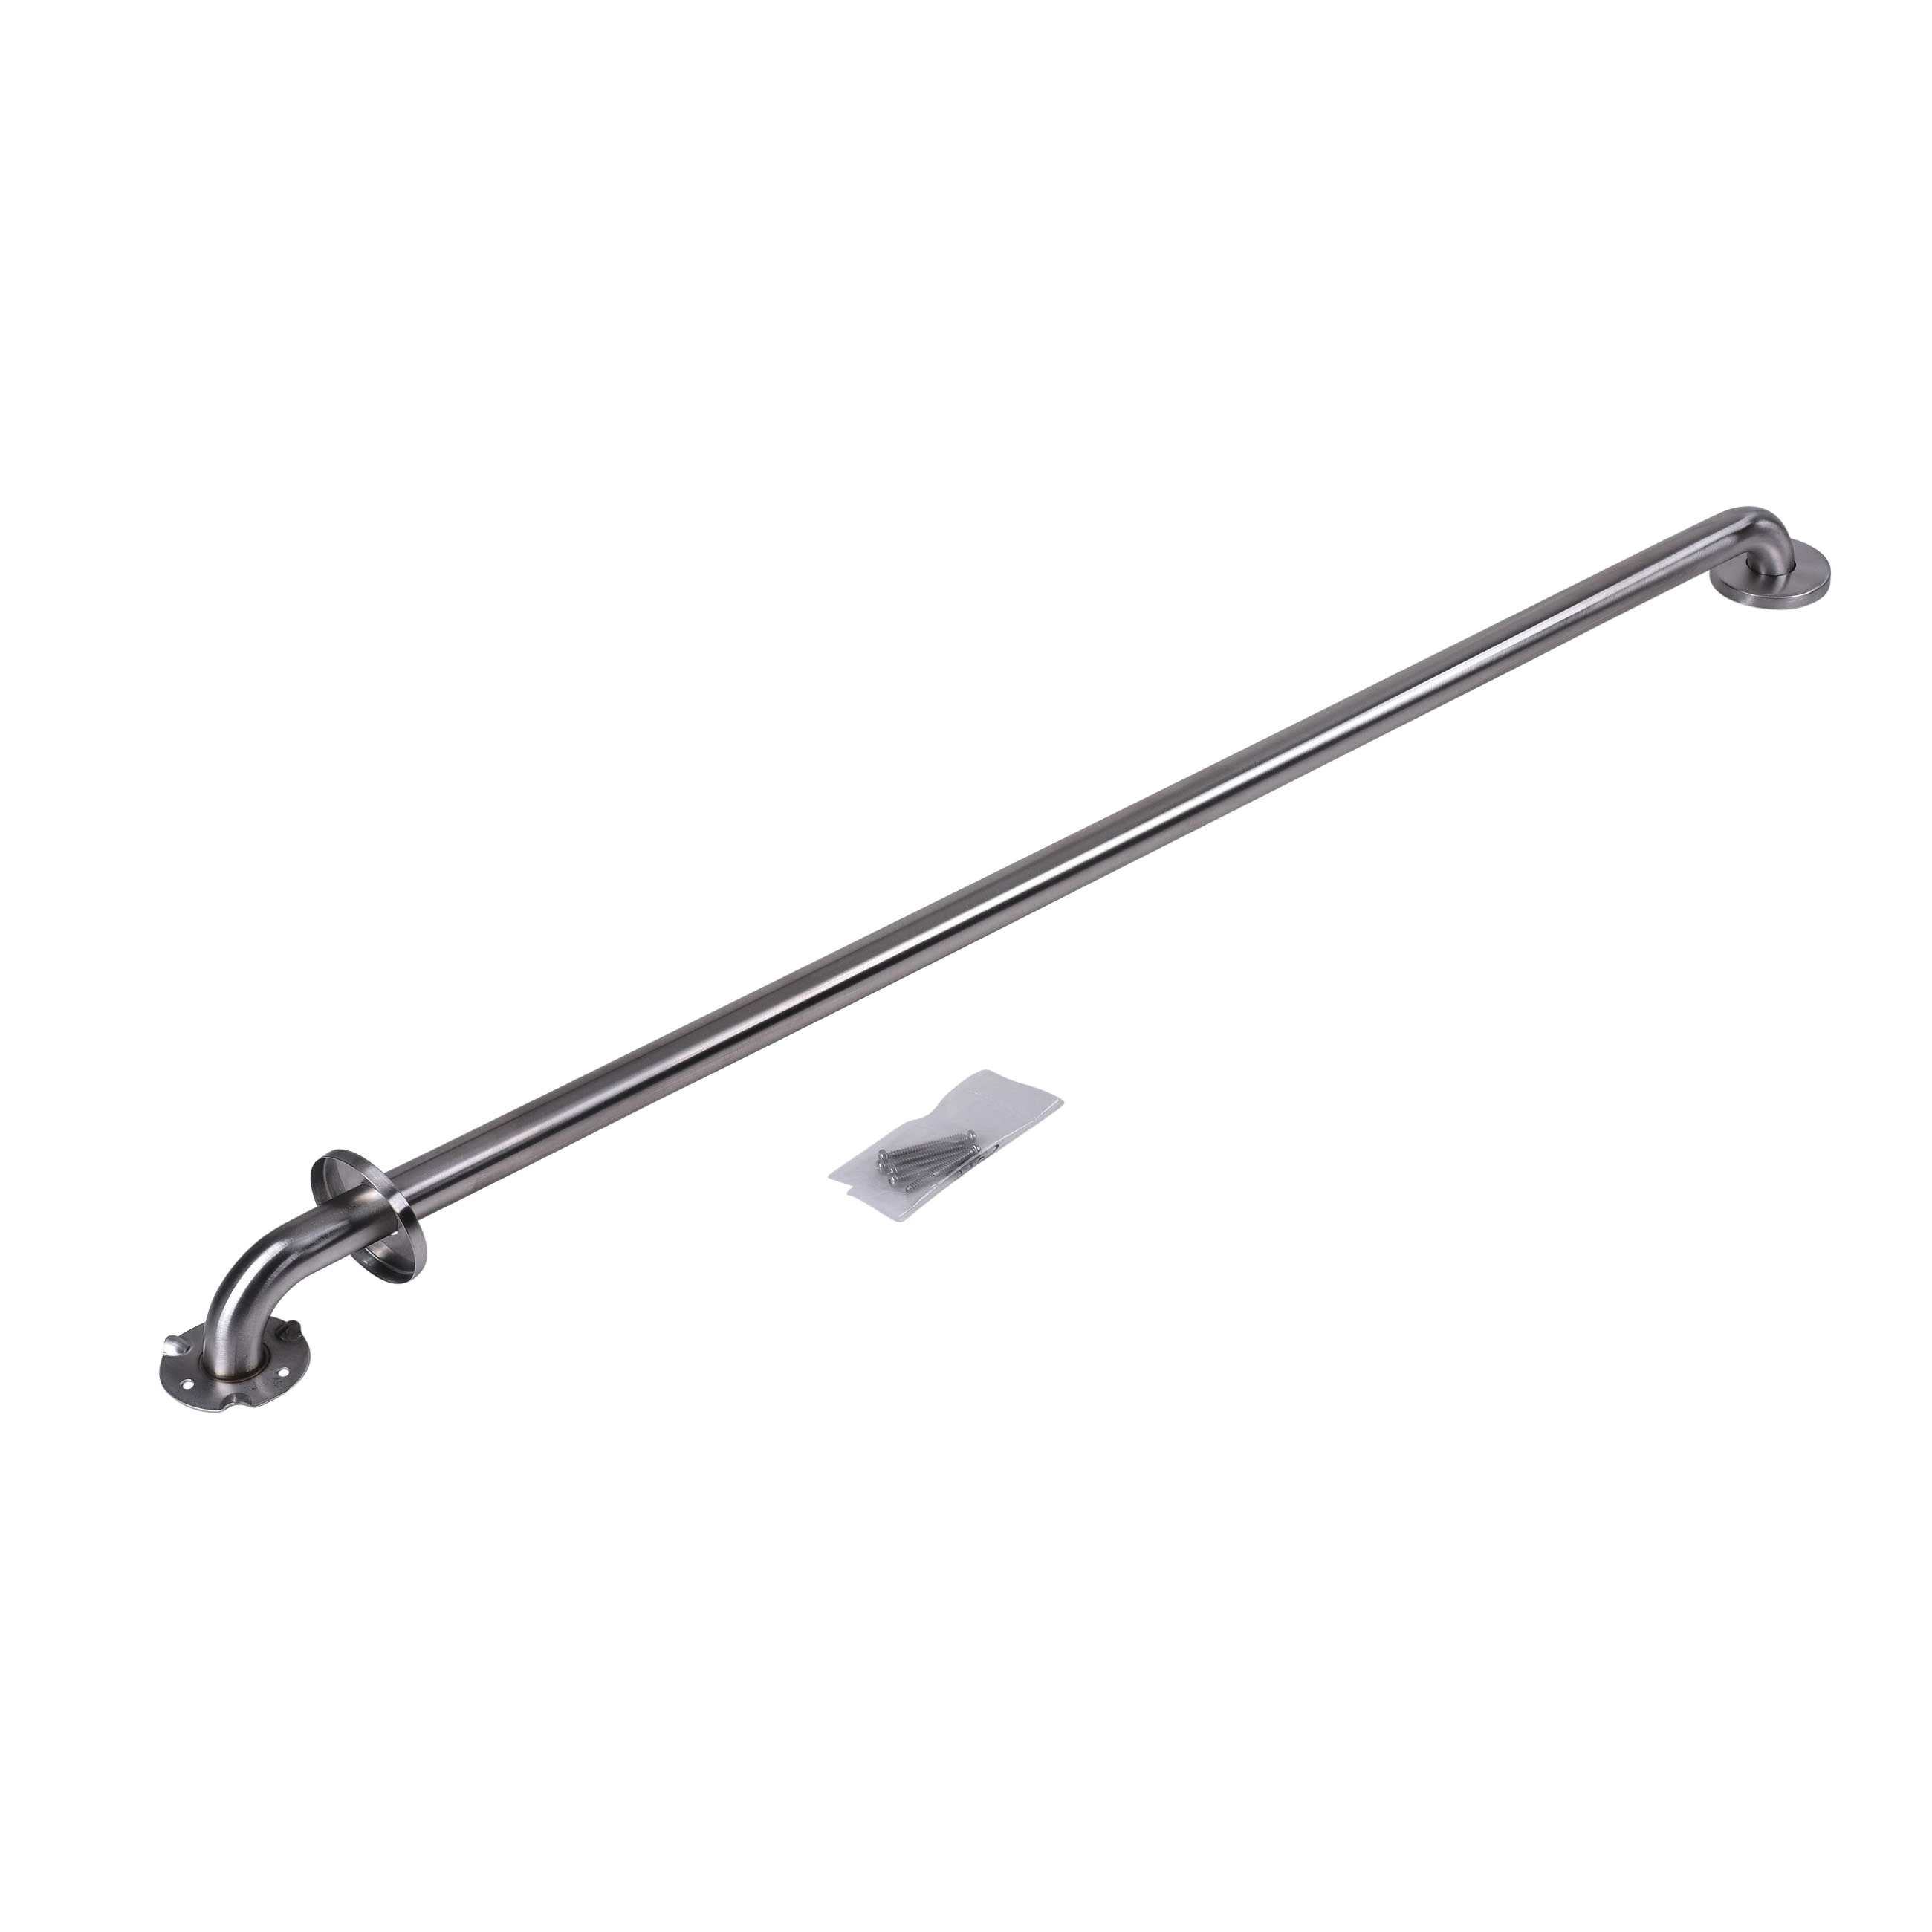 Dearborn® DB8748 Grab Bar, 1-1/4 in Dia x 48 in L, Satin, 304 Stainless Steel, Import